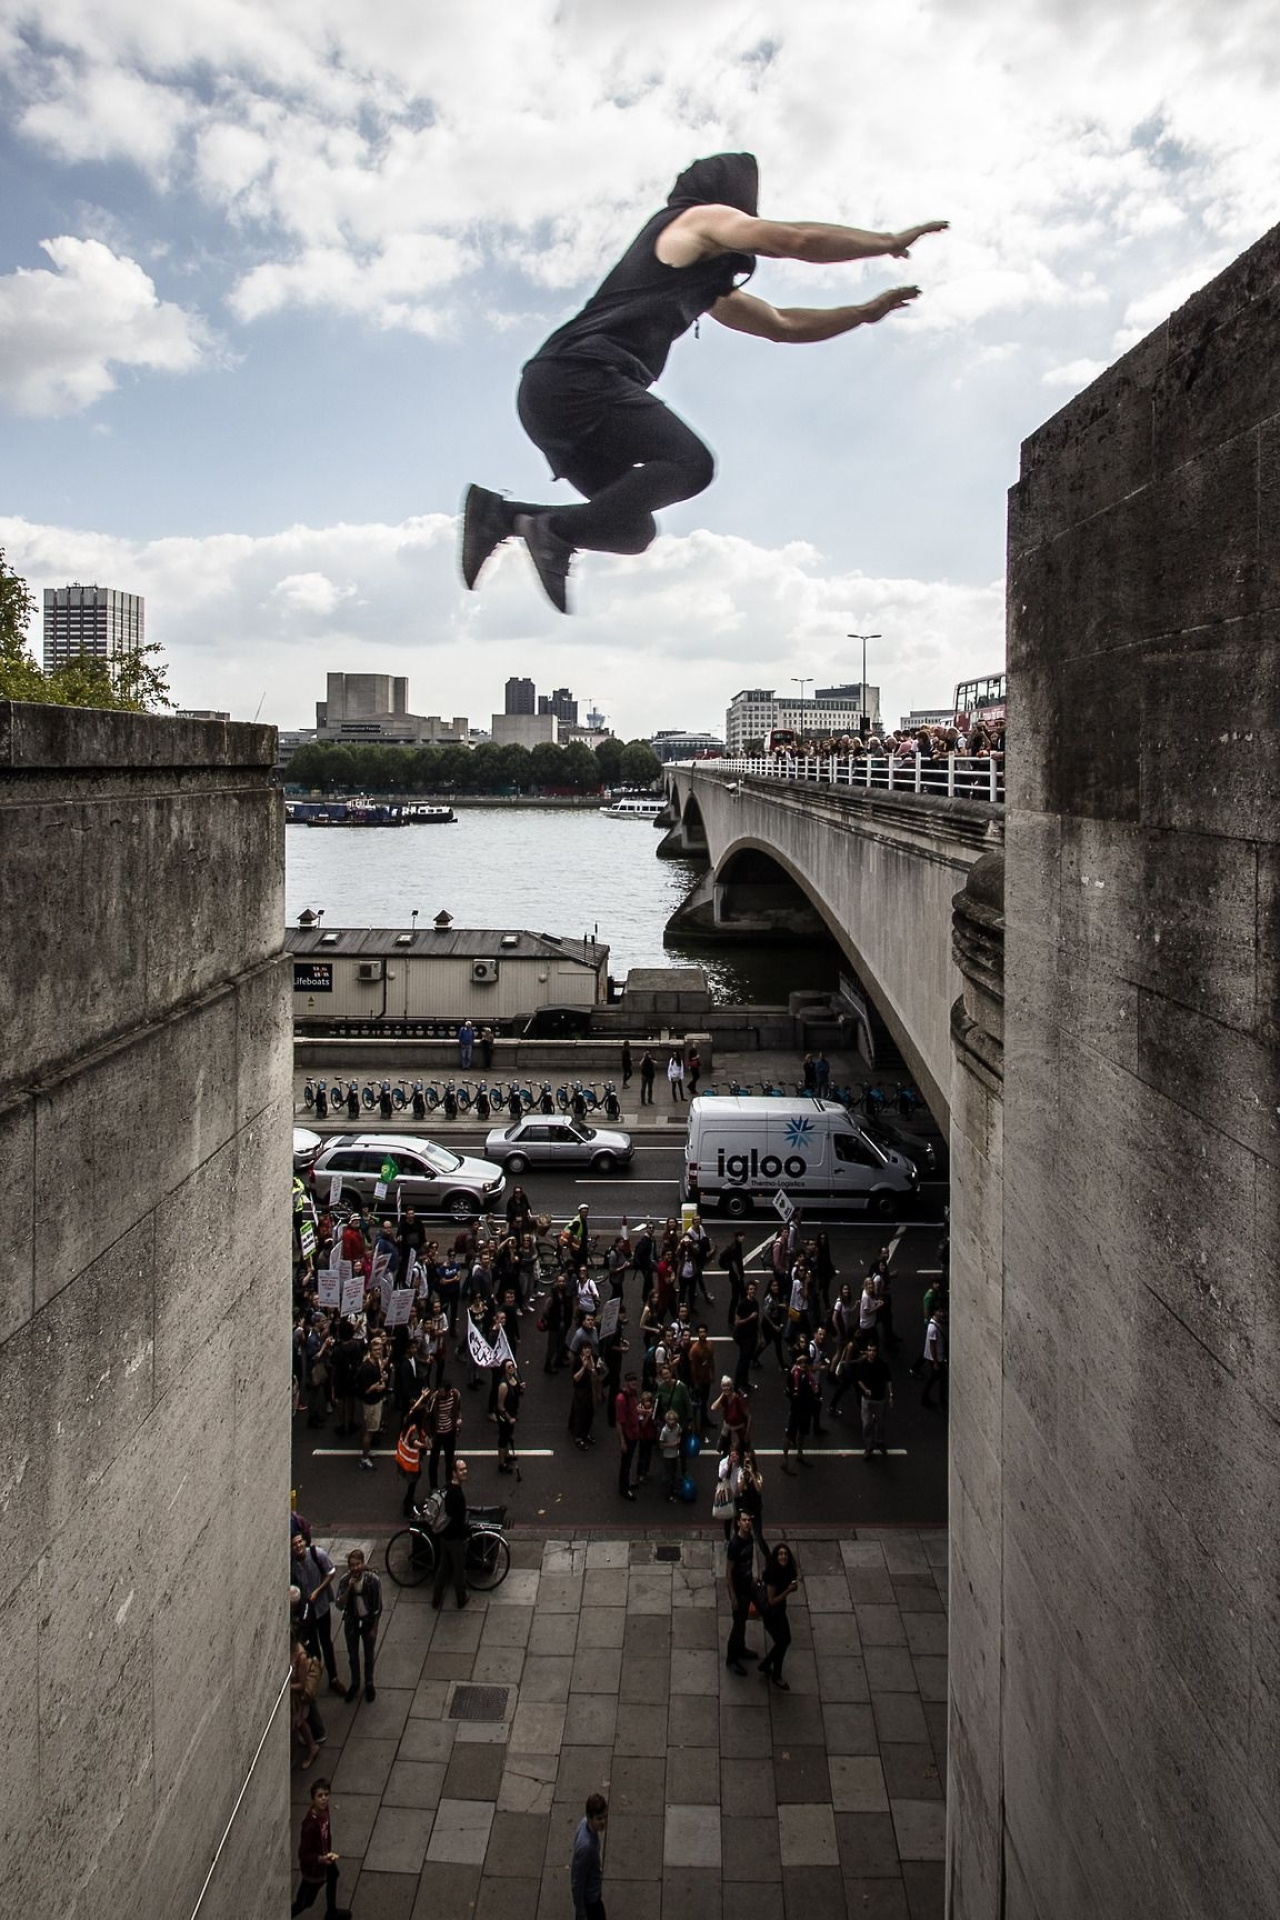 Freerunning: Parkour ideas, Freedom of movement, Athletic discipline with the aesthetic elements. 1280x1920 HD Background.